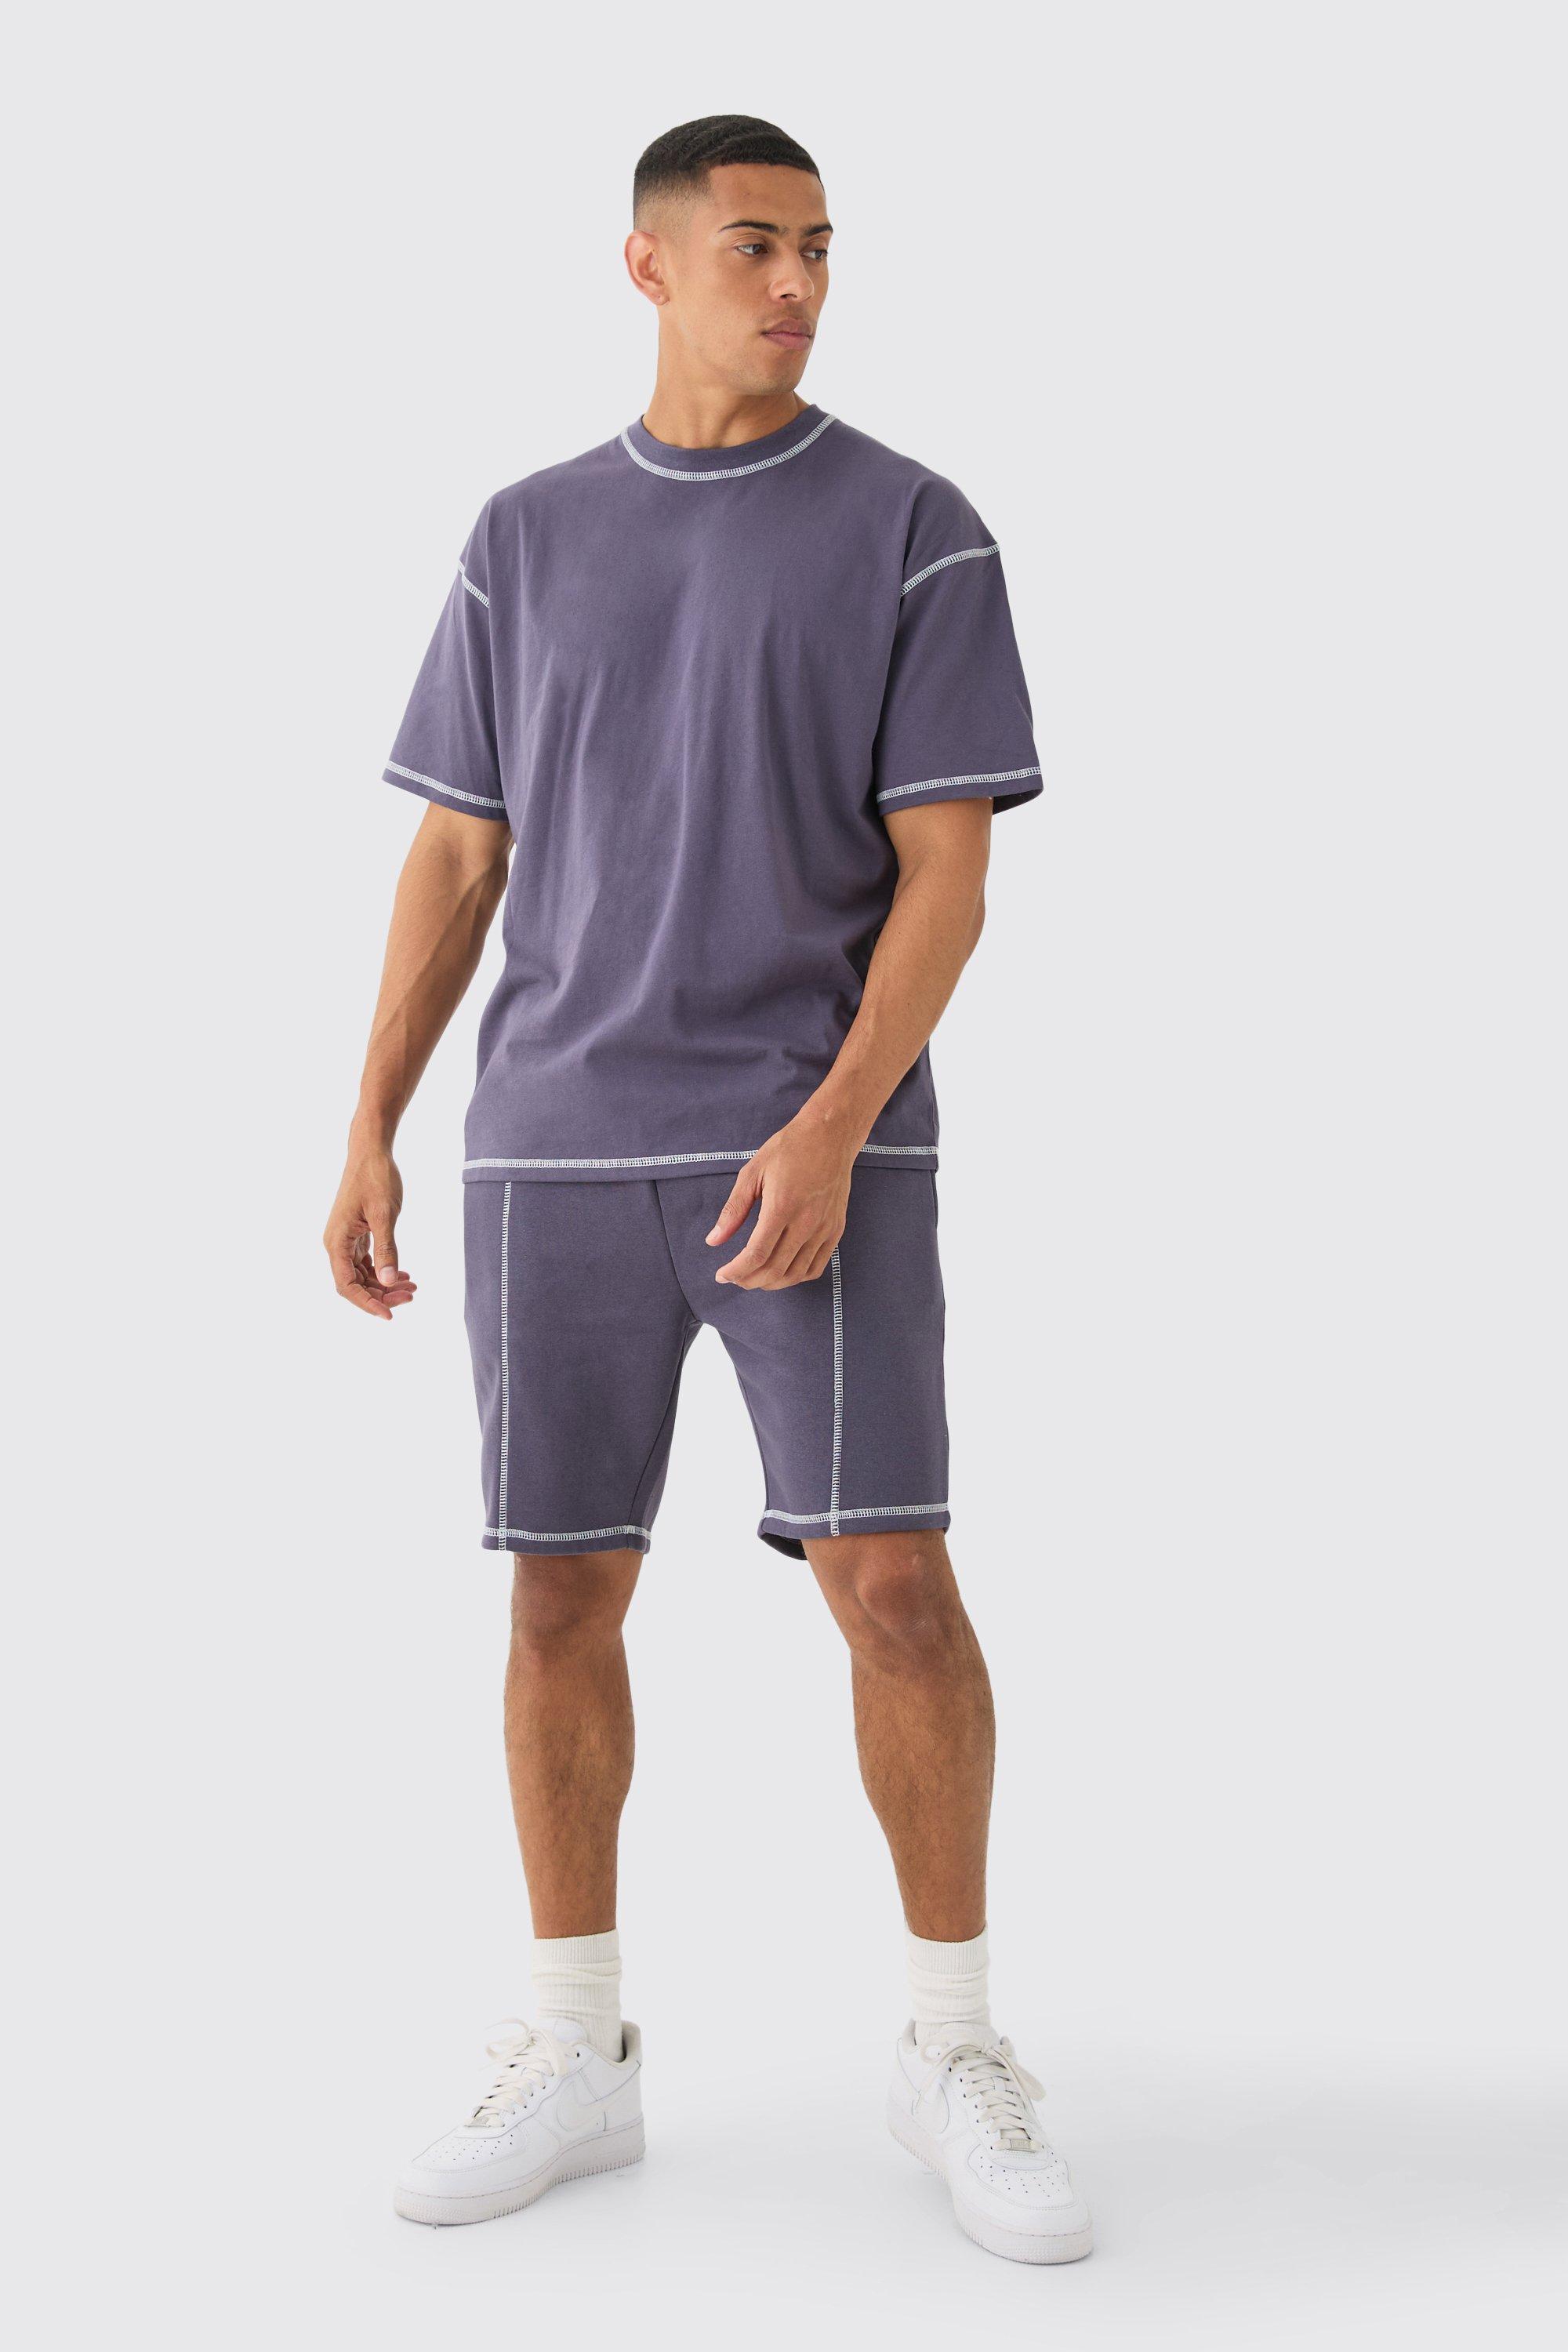 Image of Oversized Contrast Stitch Embroidered T-shirt & Short Set, Purple